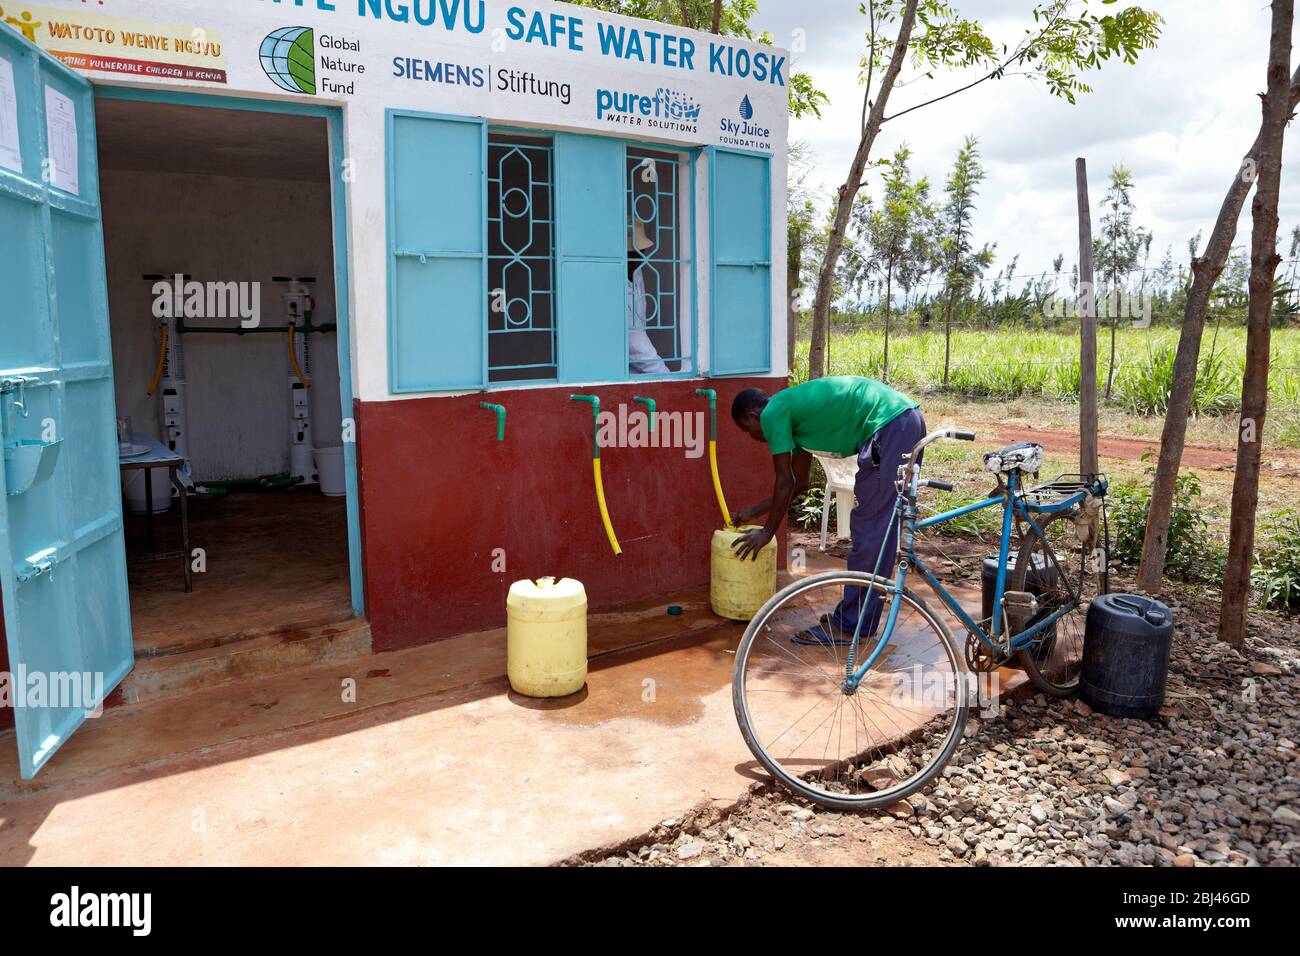 Young man carries a filled water canister from the waterhole in Mungetho, north of Naurobi to his bicycle. Stock Photo